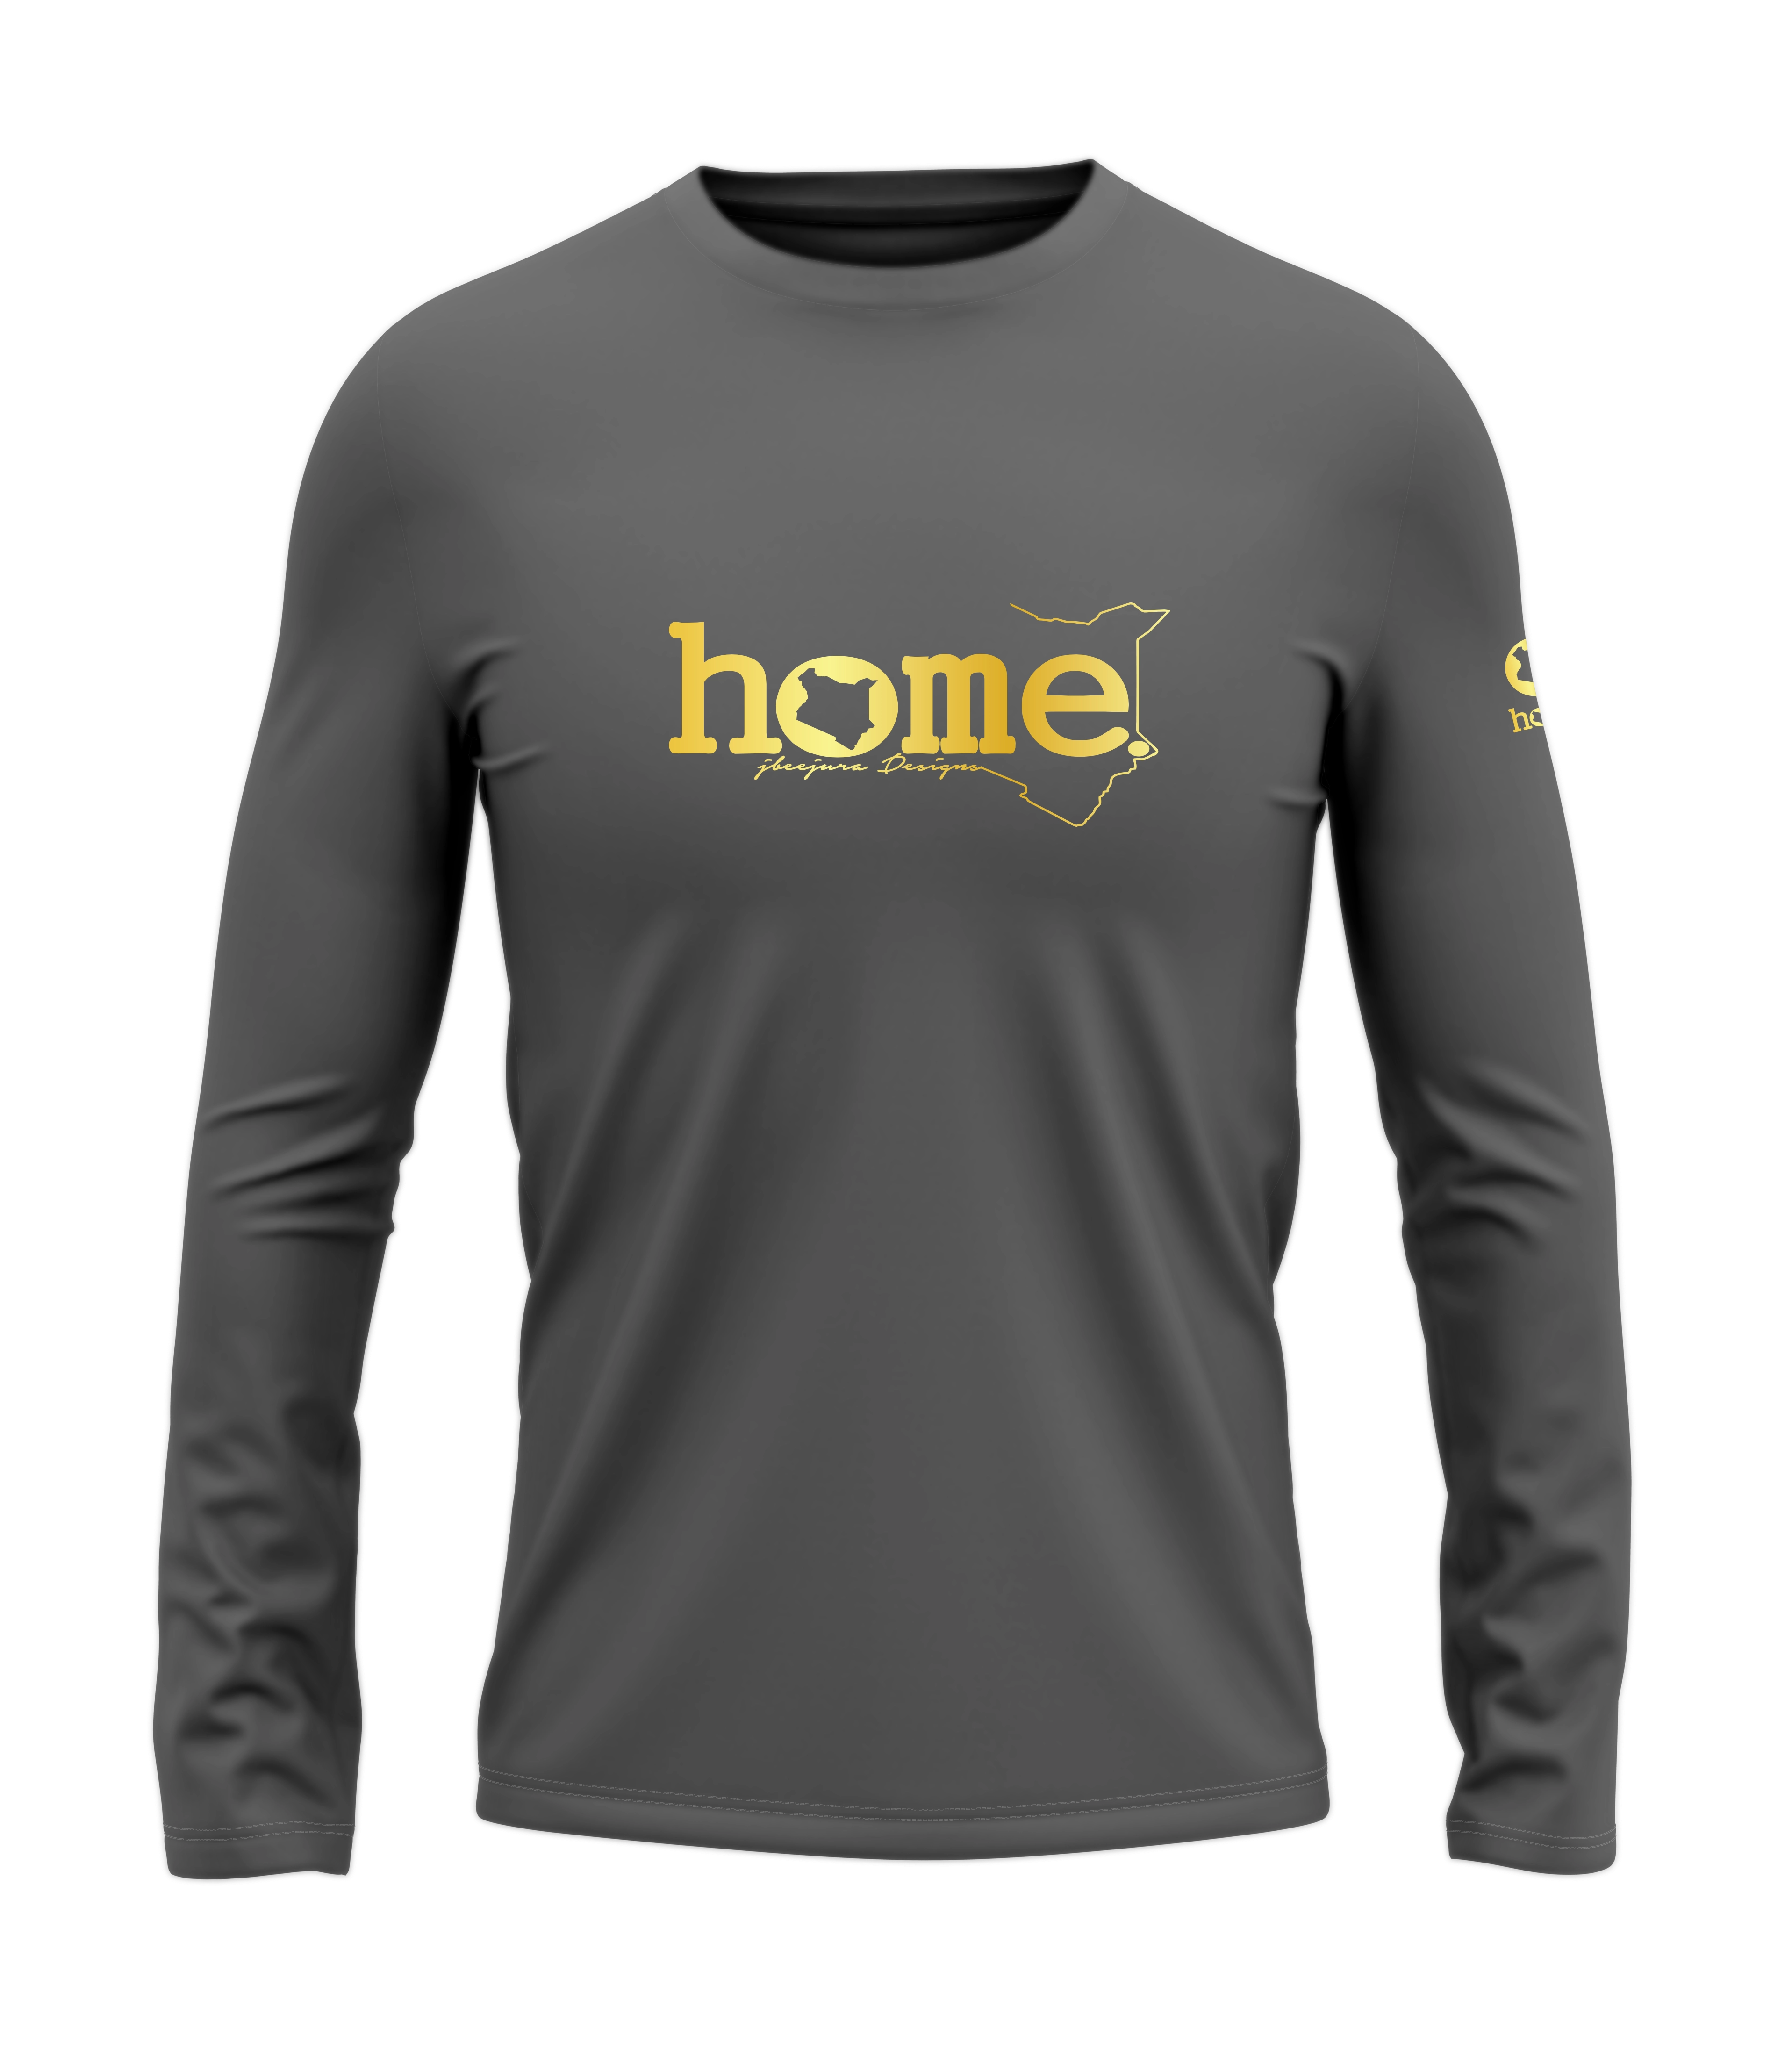 home_254 LONG-SLEEVED SAGE T-SHIRT WITH A GOLD CLASSIC WORDS PRINT – COTTON PLUS FABRIC